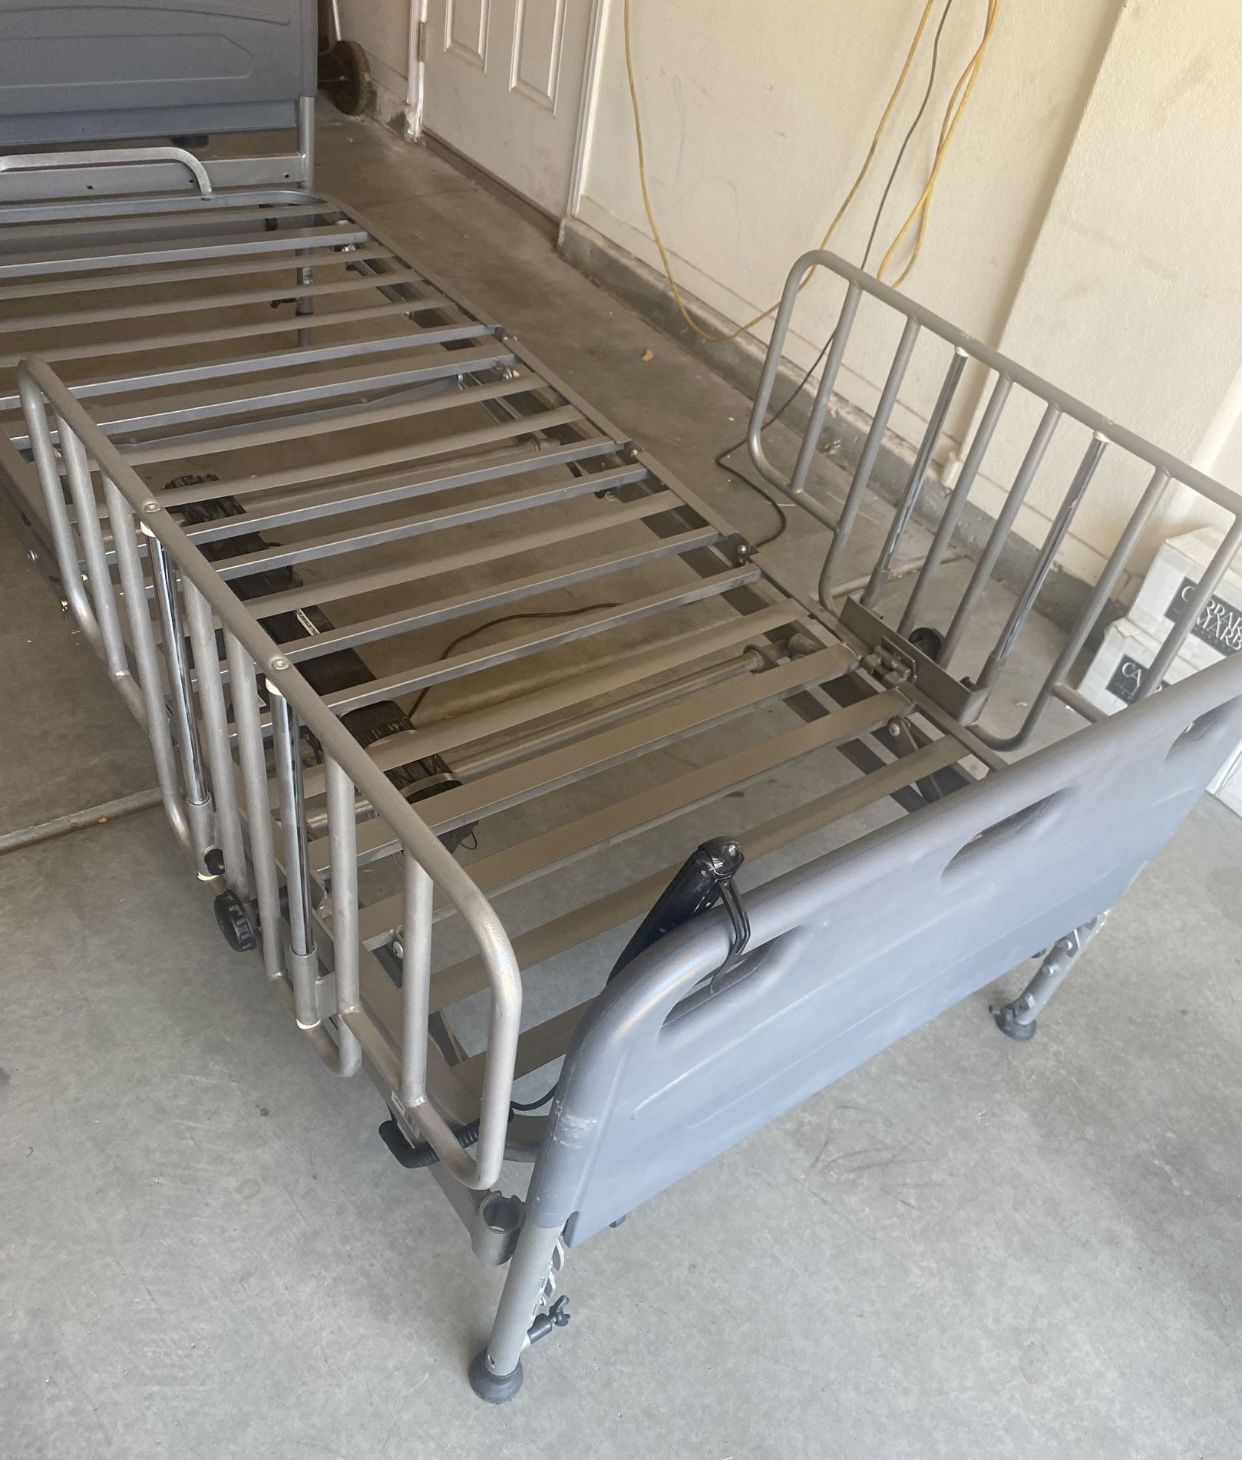 Drive Electric Bed In Good Working Condition Clean “NO MATTRESS “